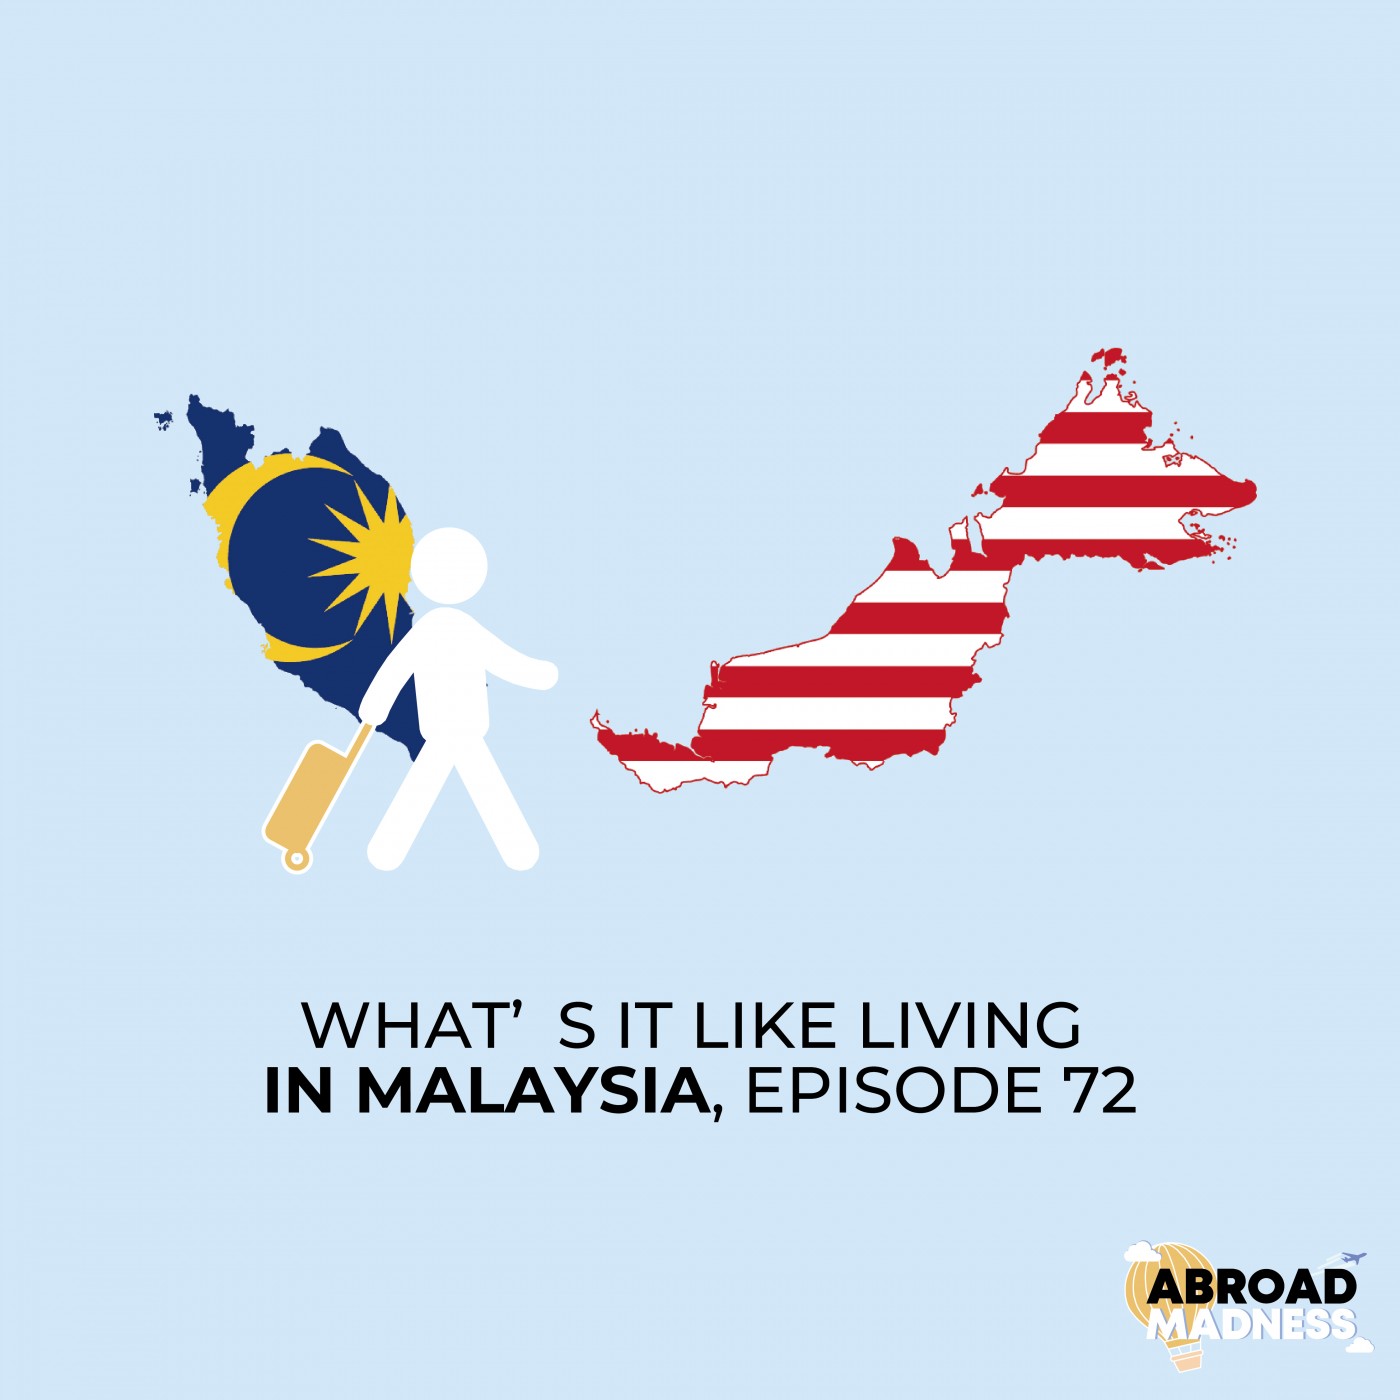 What's it like living in Malaysia, Episode 72